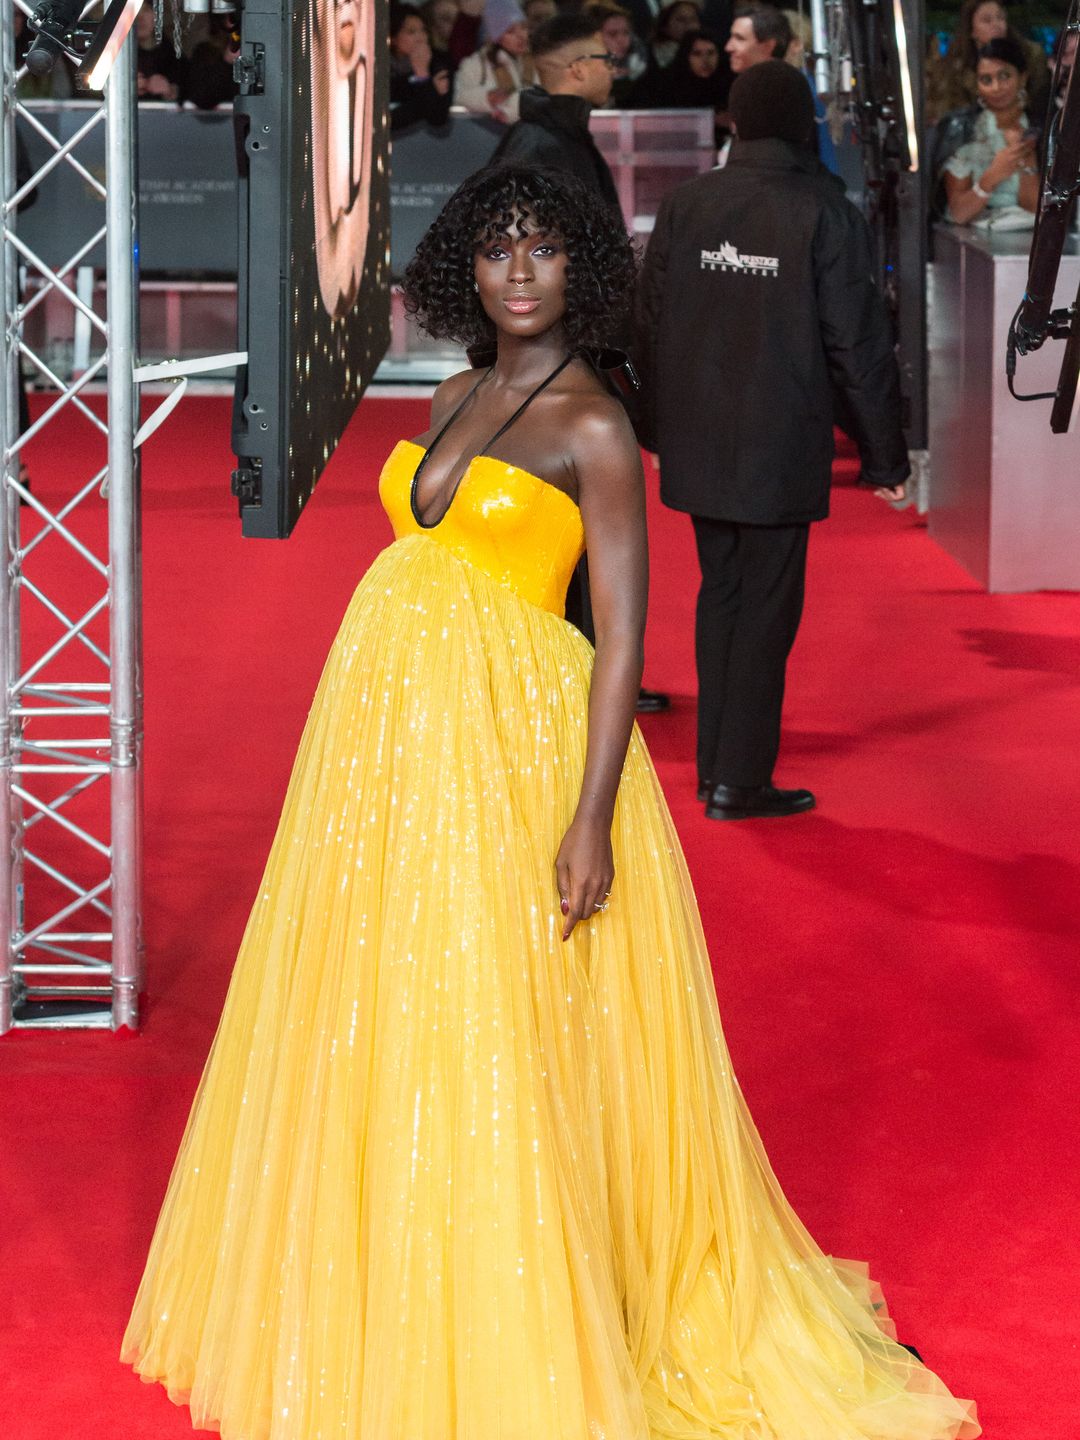 Jodie Turner-Smith attends the EE British Academy Film Awards in a bright yellow dress